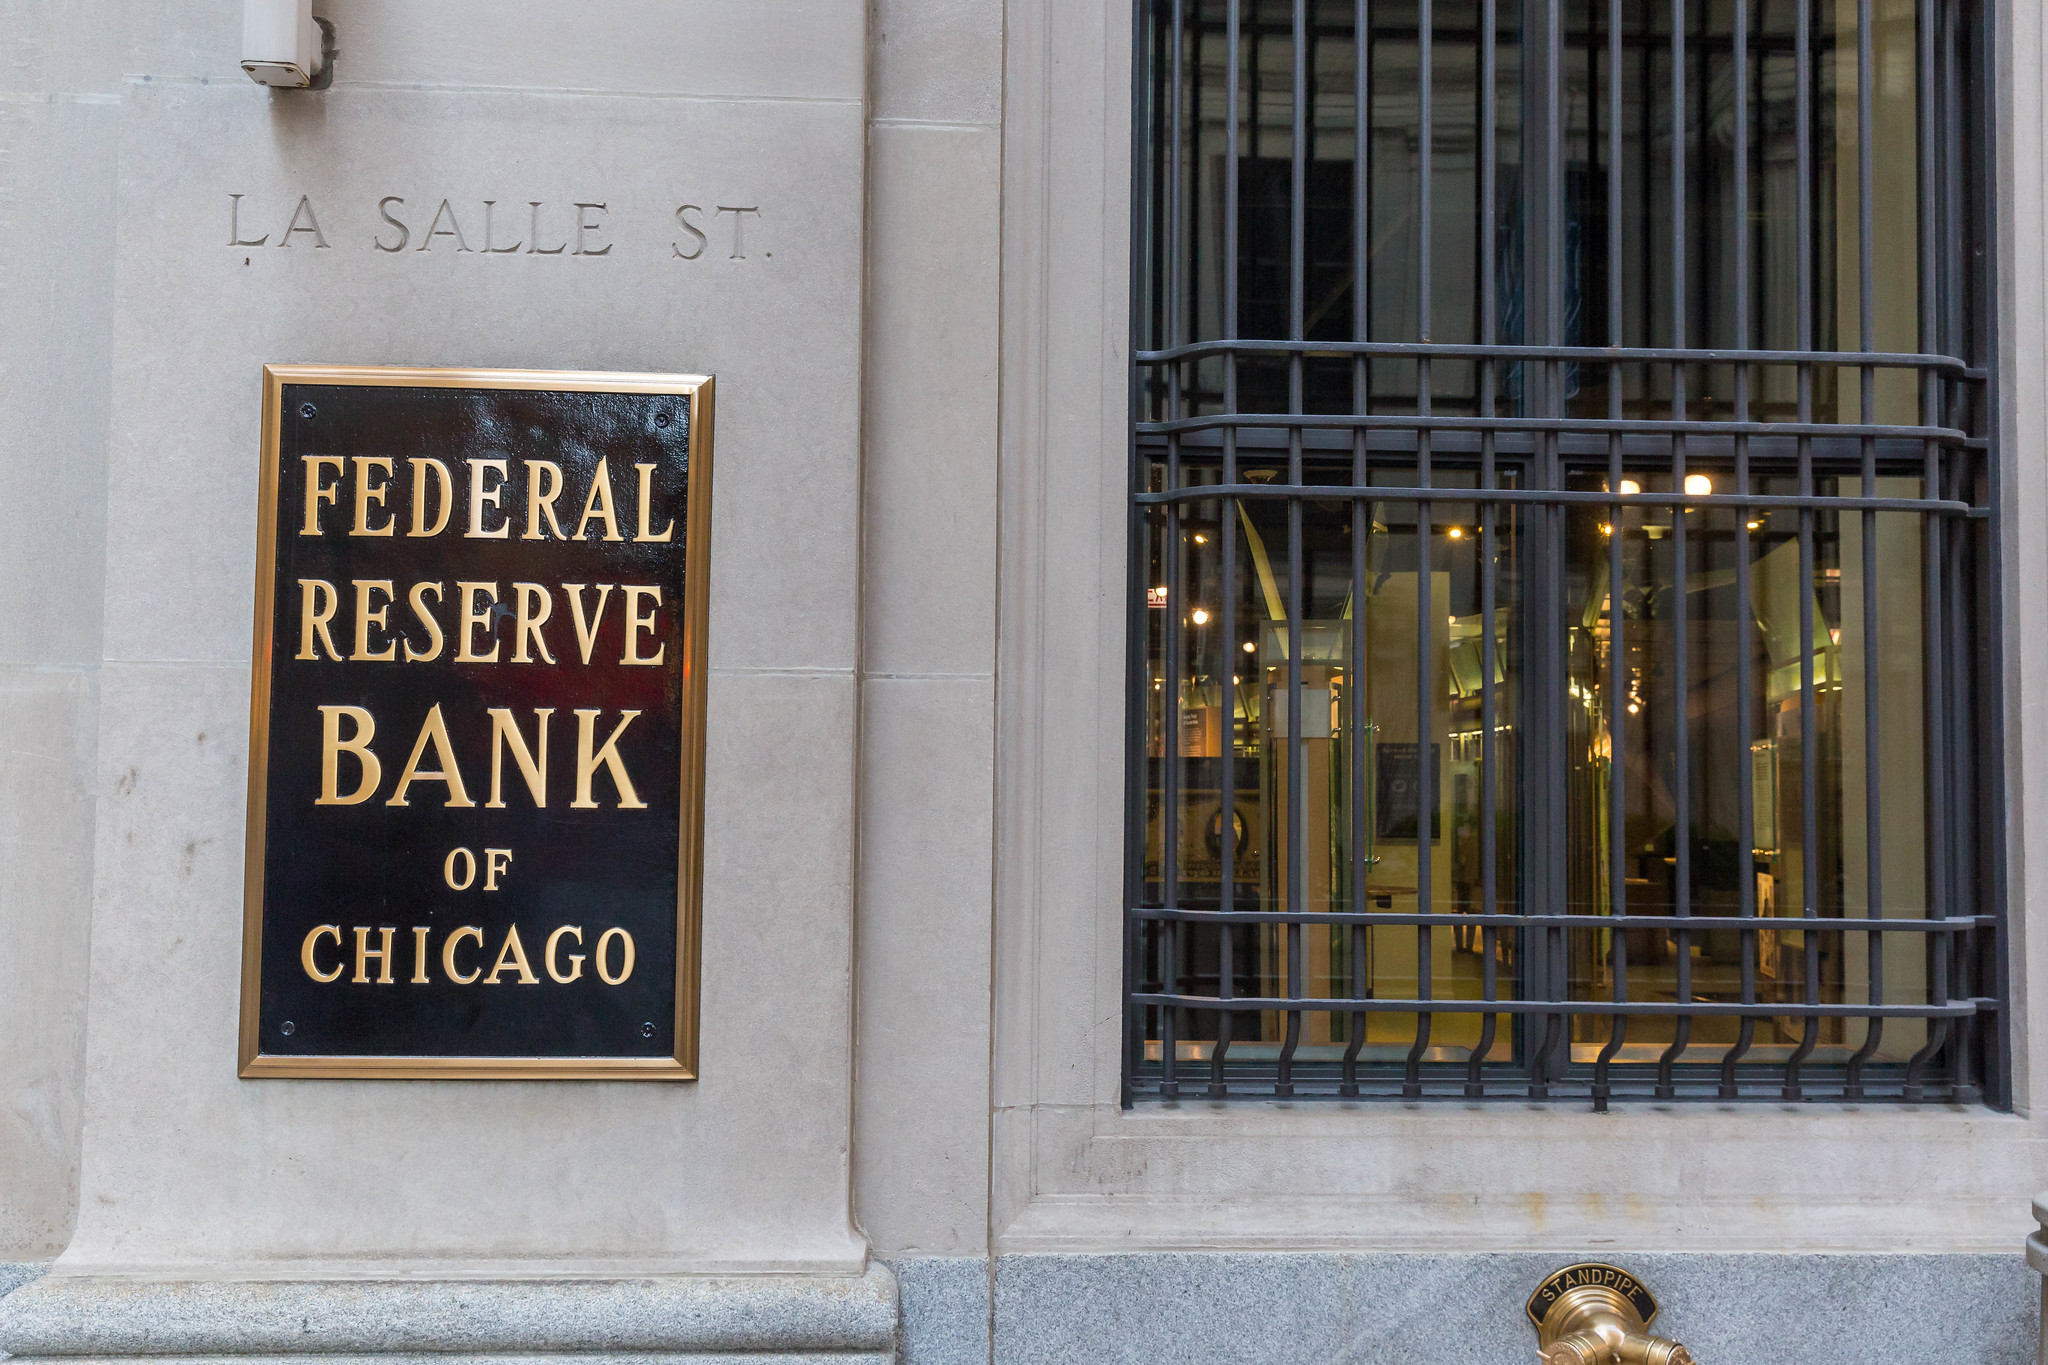 Federal Reserve Bank of Chicago on La Salle St.